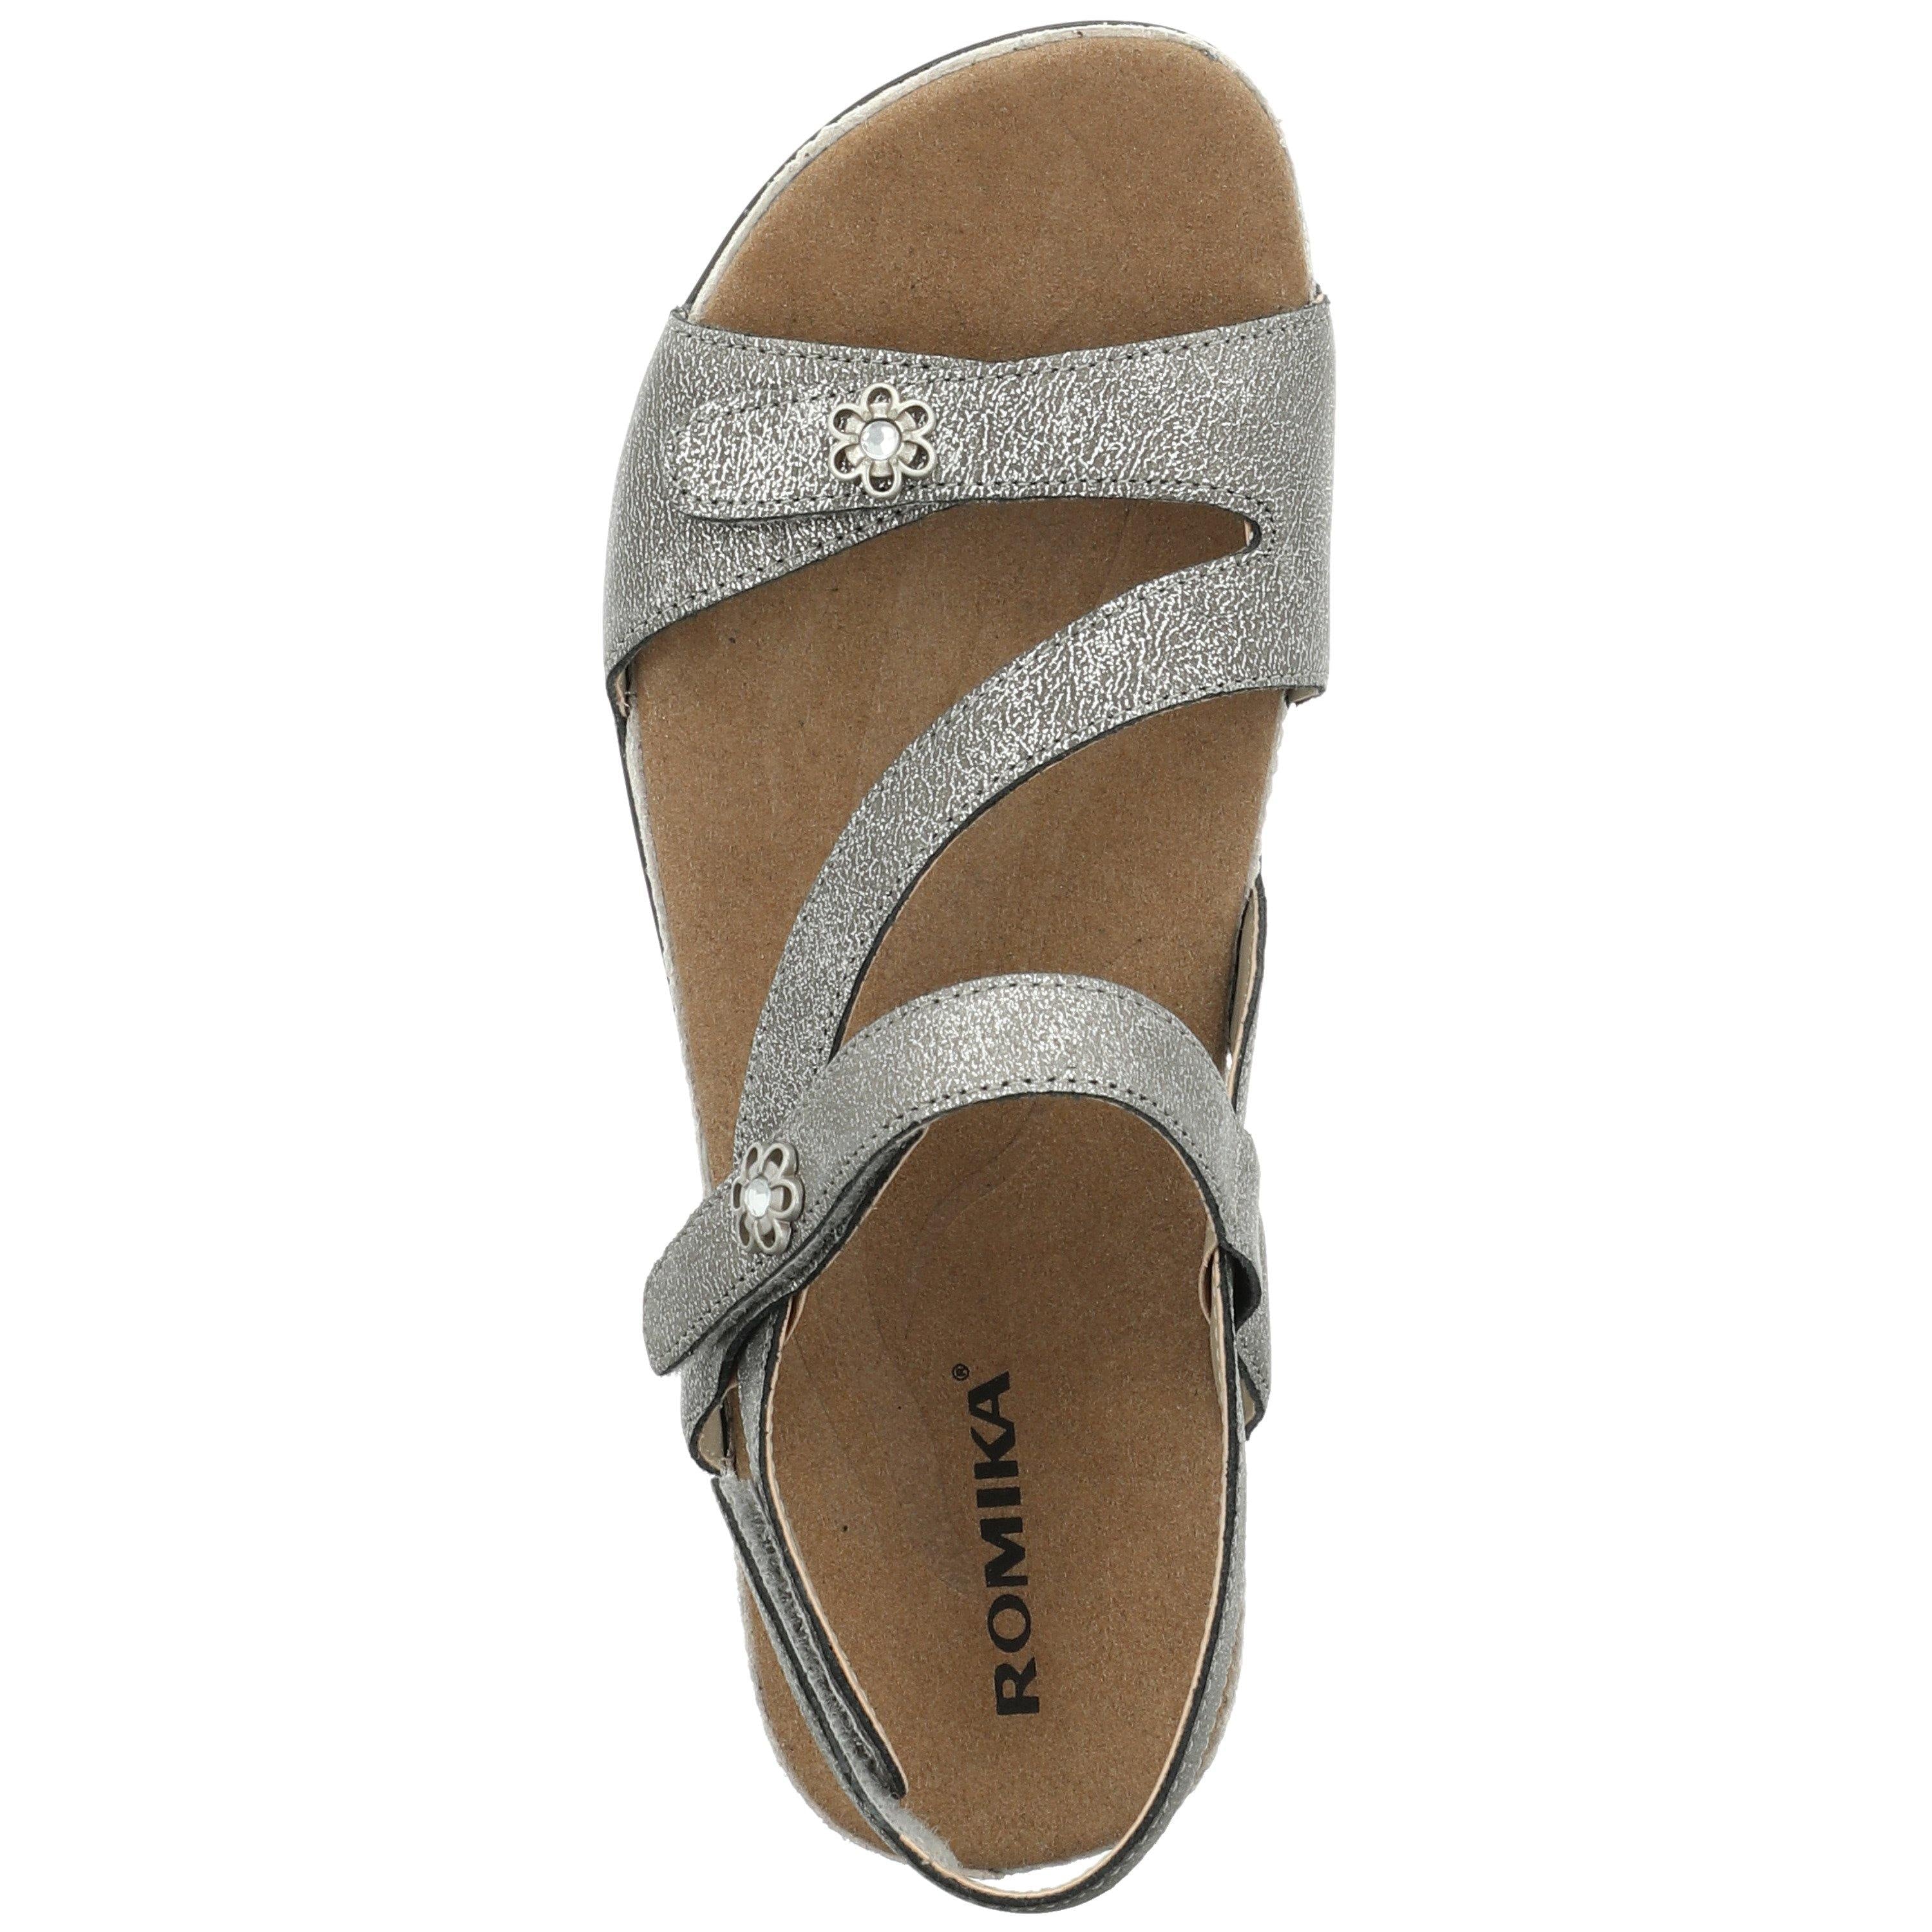 Romika USA | Shoes, Sandals, Sneakers, Boots, Footwear